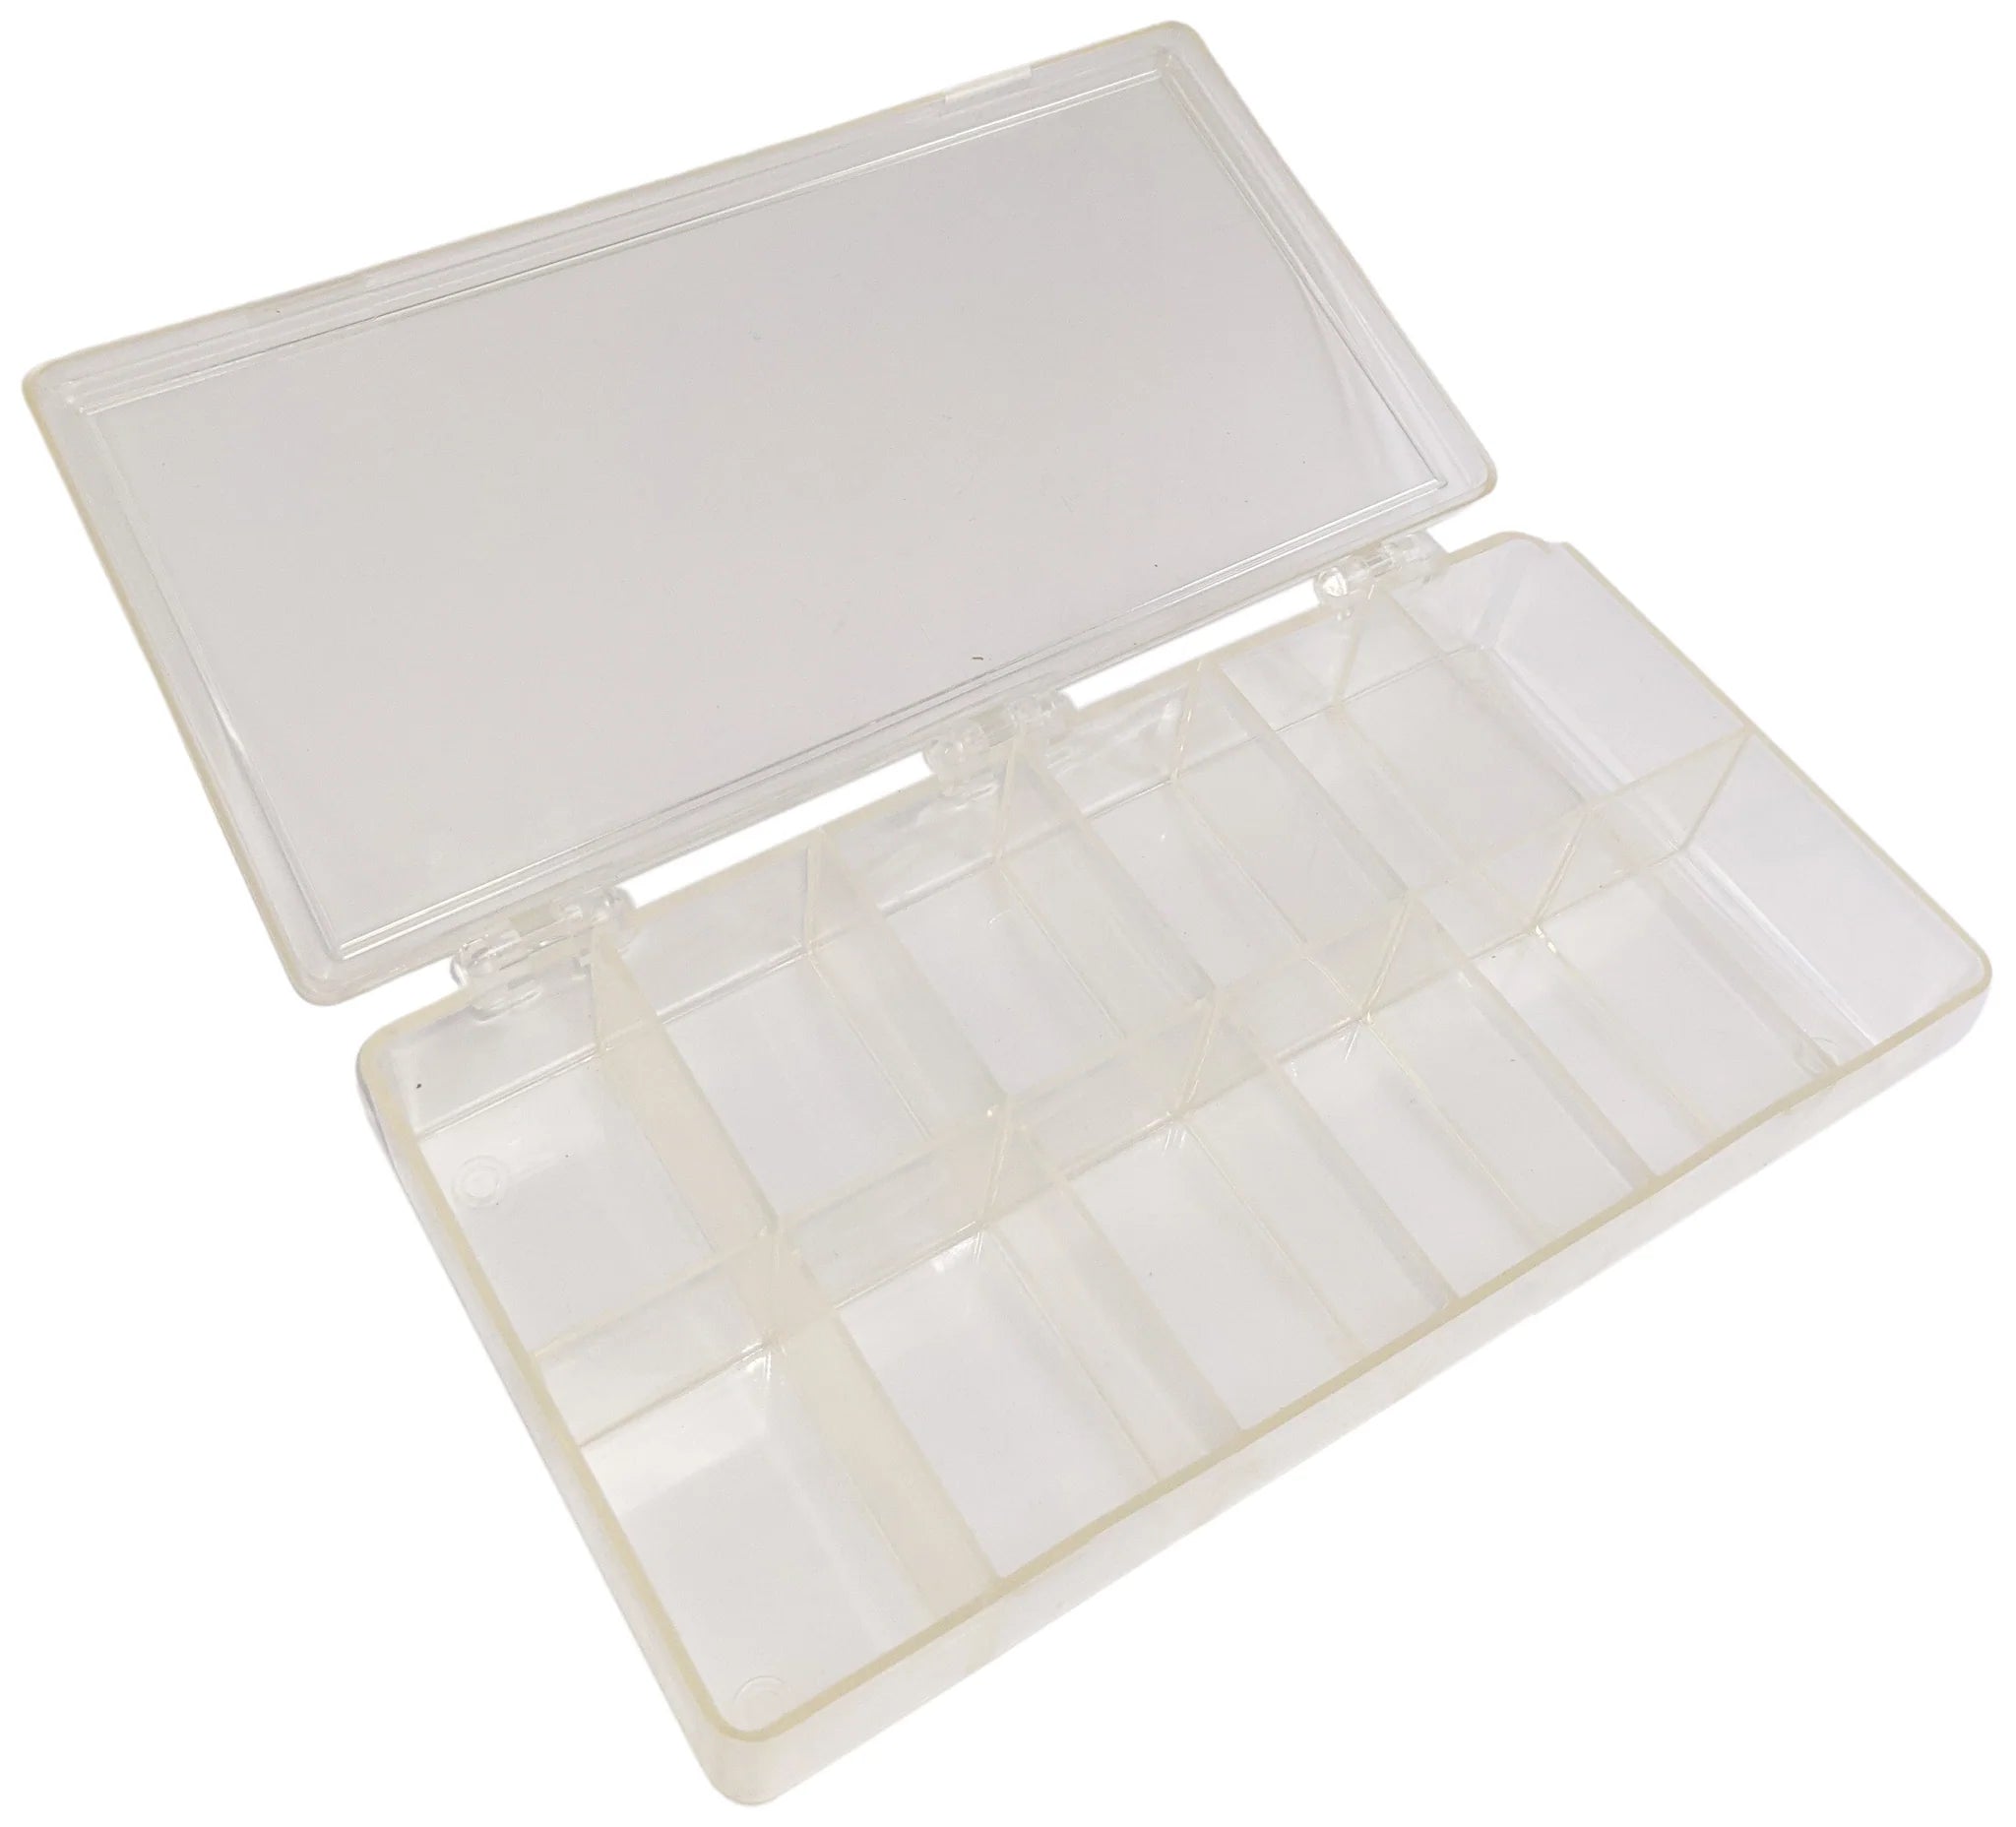 12 Compartment Plastic Storage Box with Hinged Snap-Close Lid